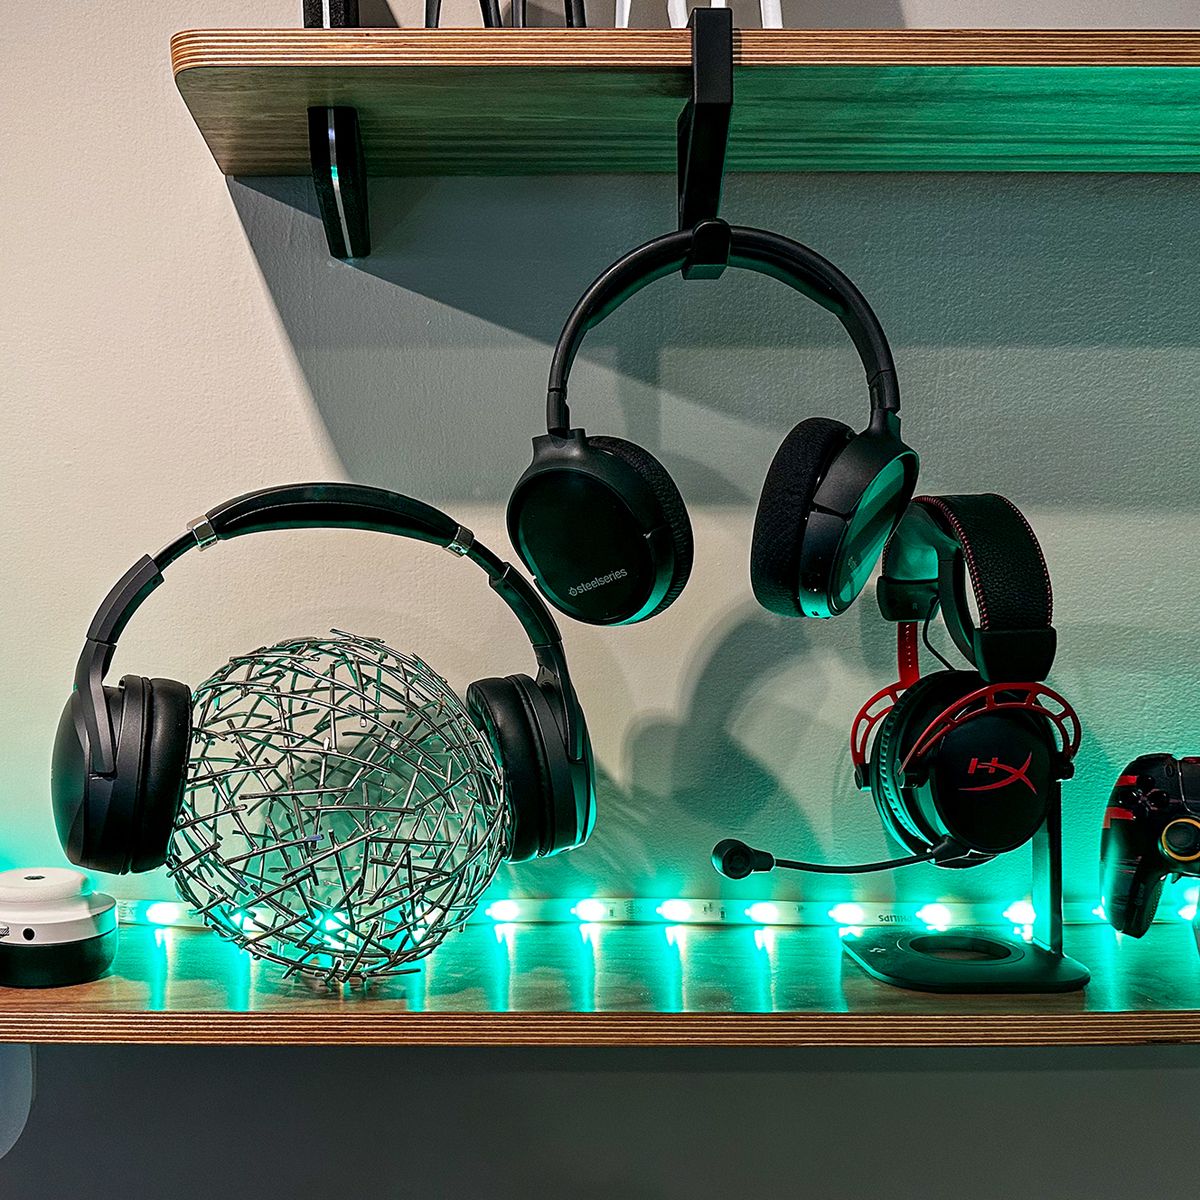 11 of the Best Cozy Gaming Accessories You Can Buy